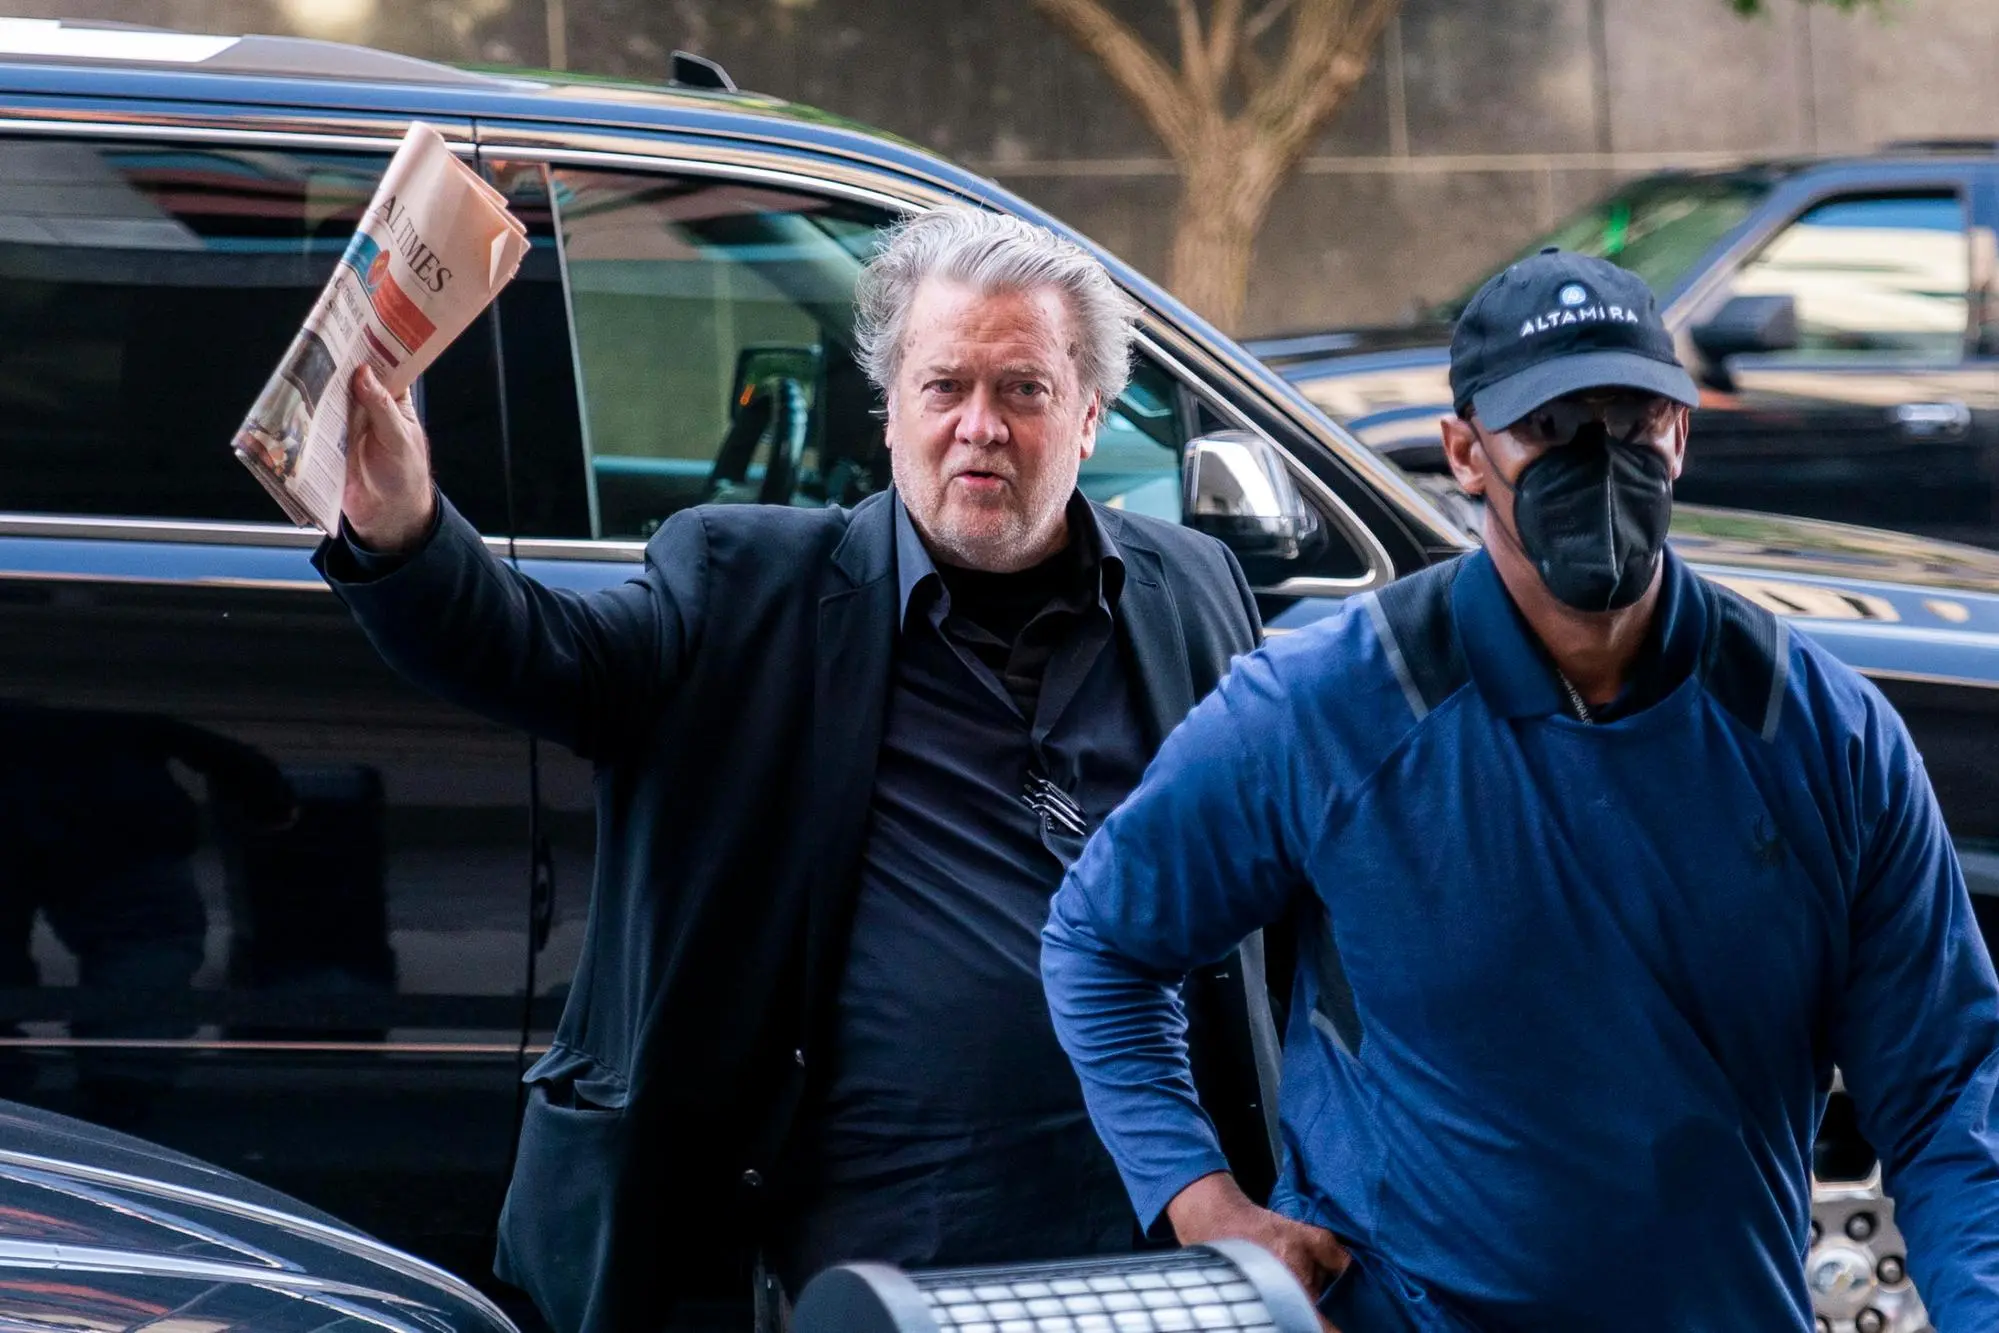 epa10086246 Steve Bannon (L), former advisor to President Trump, arrives at the Federal Courthouse in Washington, DC, USA, 22 July 2022. Bannon faces two criminal charges for his failure to comply with subpoenas from the House Select Committee to Investigate the January 6 Attack on the Capitol. EPA/SHAWN THEW